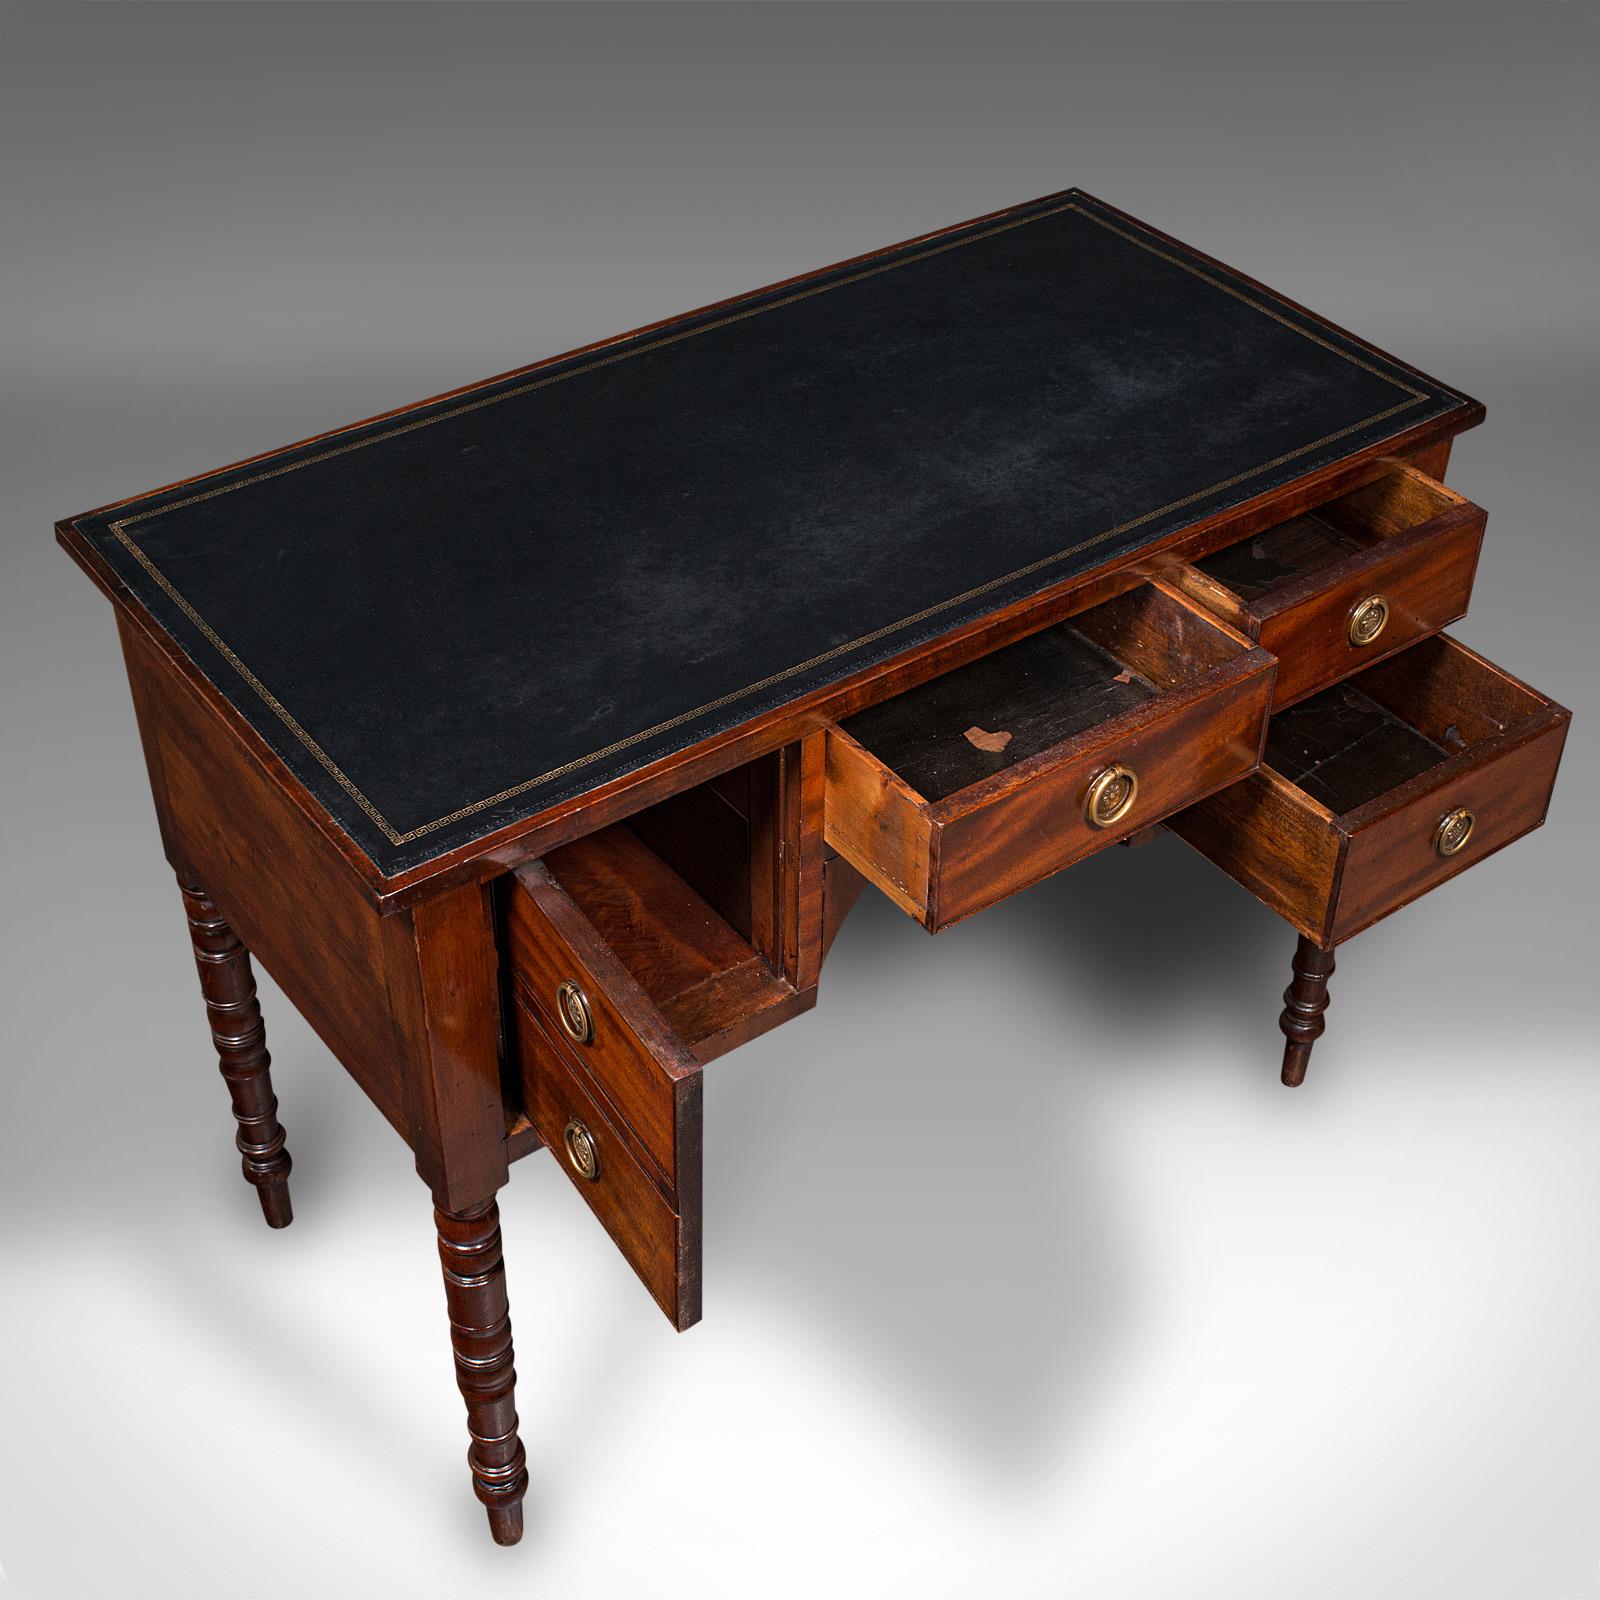 19th Century Antique Ladies Writing Desk, English, Correspondence Table, Victorian, C.1850 For Sale